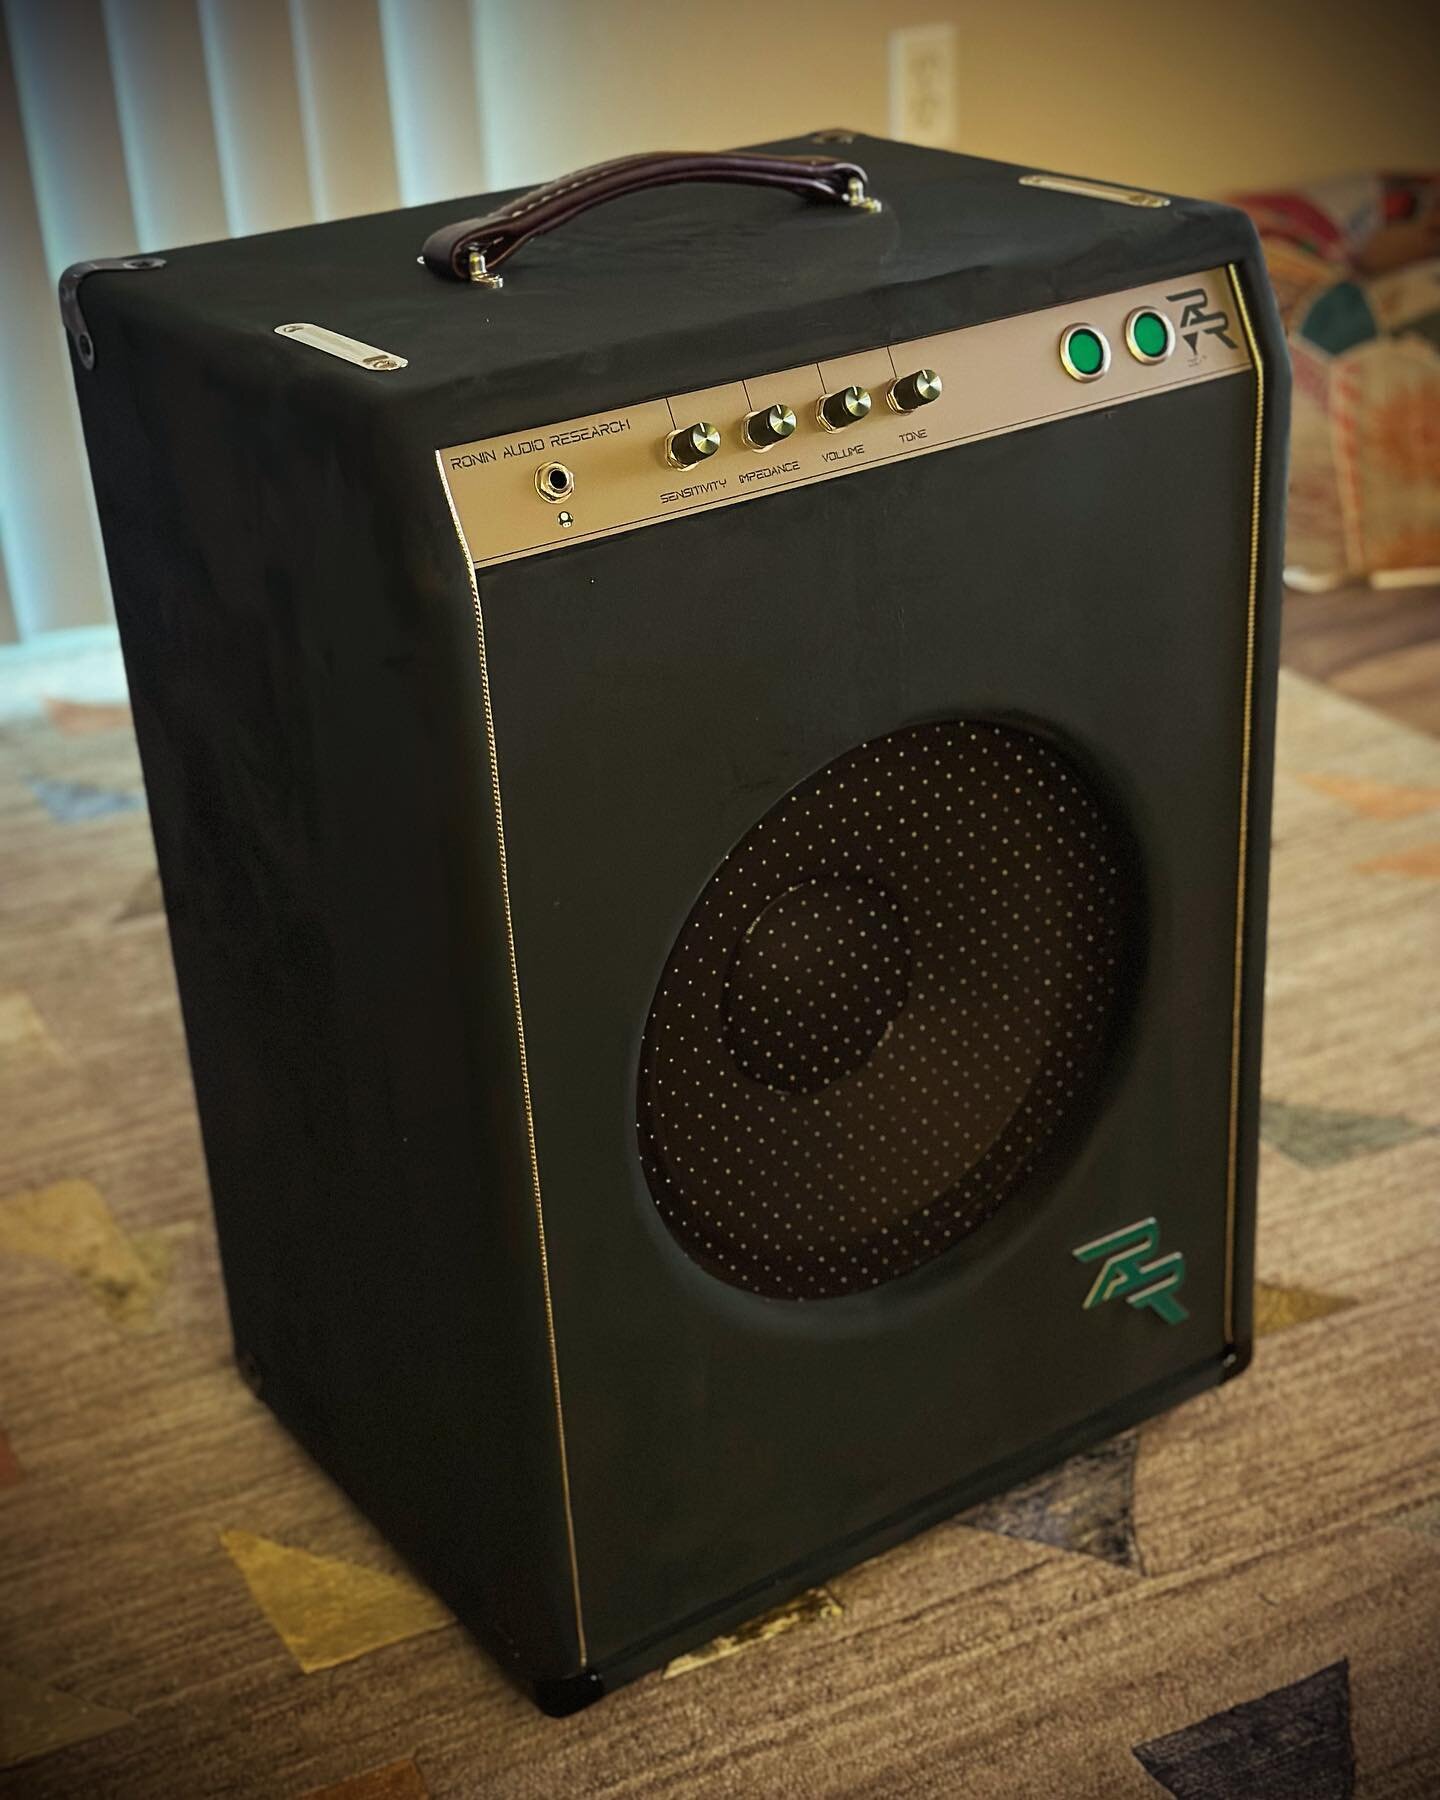 RAR &ldquo;G.E.M&rdquo; Prototype finished in Emerald Green paired with 60s 12&rdquo; EV SRO &ldquo;Coffee Can&rdquo; Alnico driver. 
.
Single Ended KT66 output section pushed by an NOS octal 6SJ7-GT and 6SL7-GT. 
.
.
#raramps #roninaudioresearch #ro